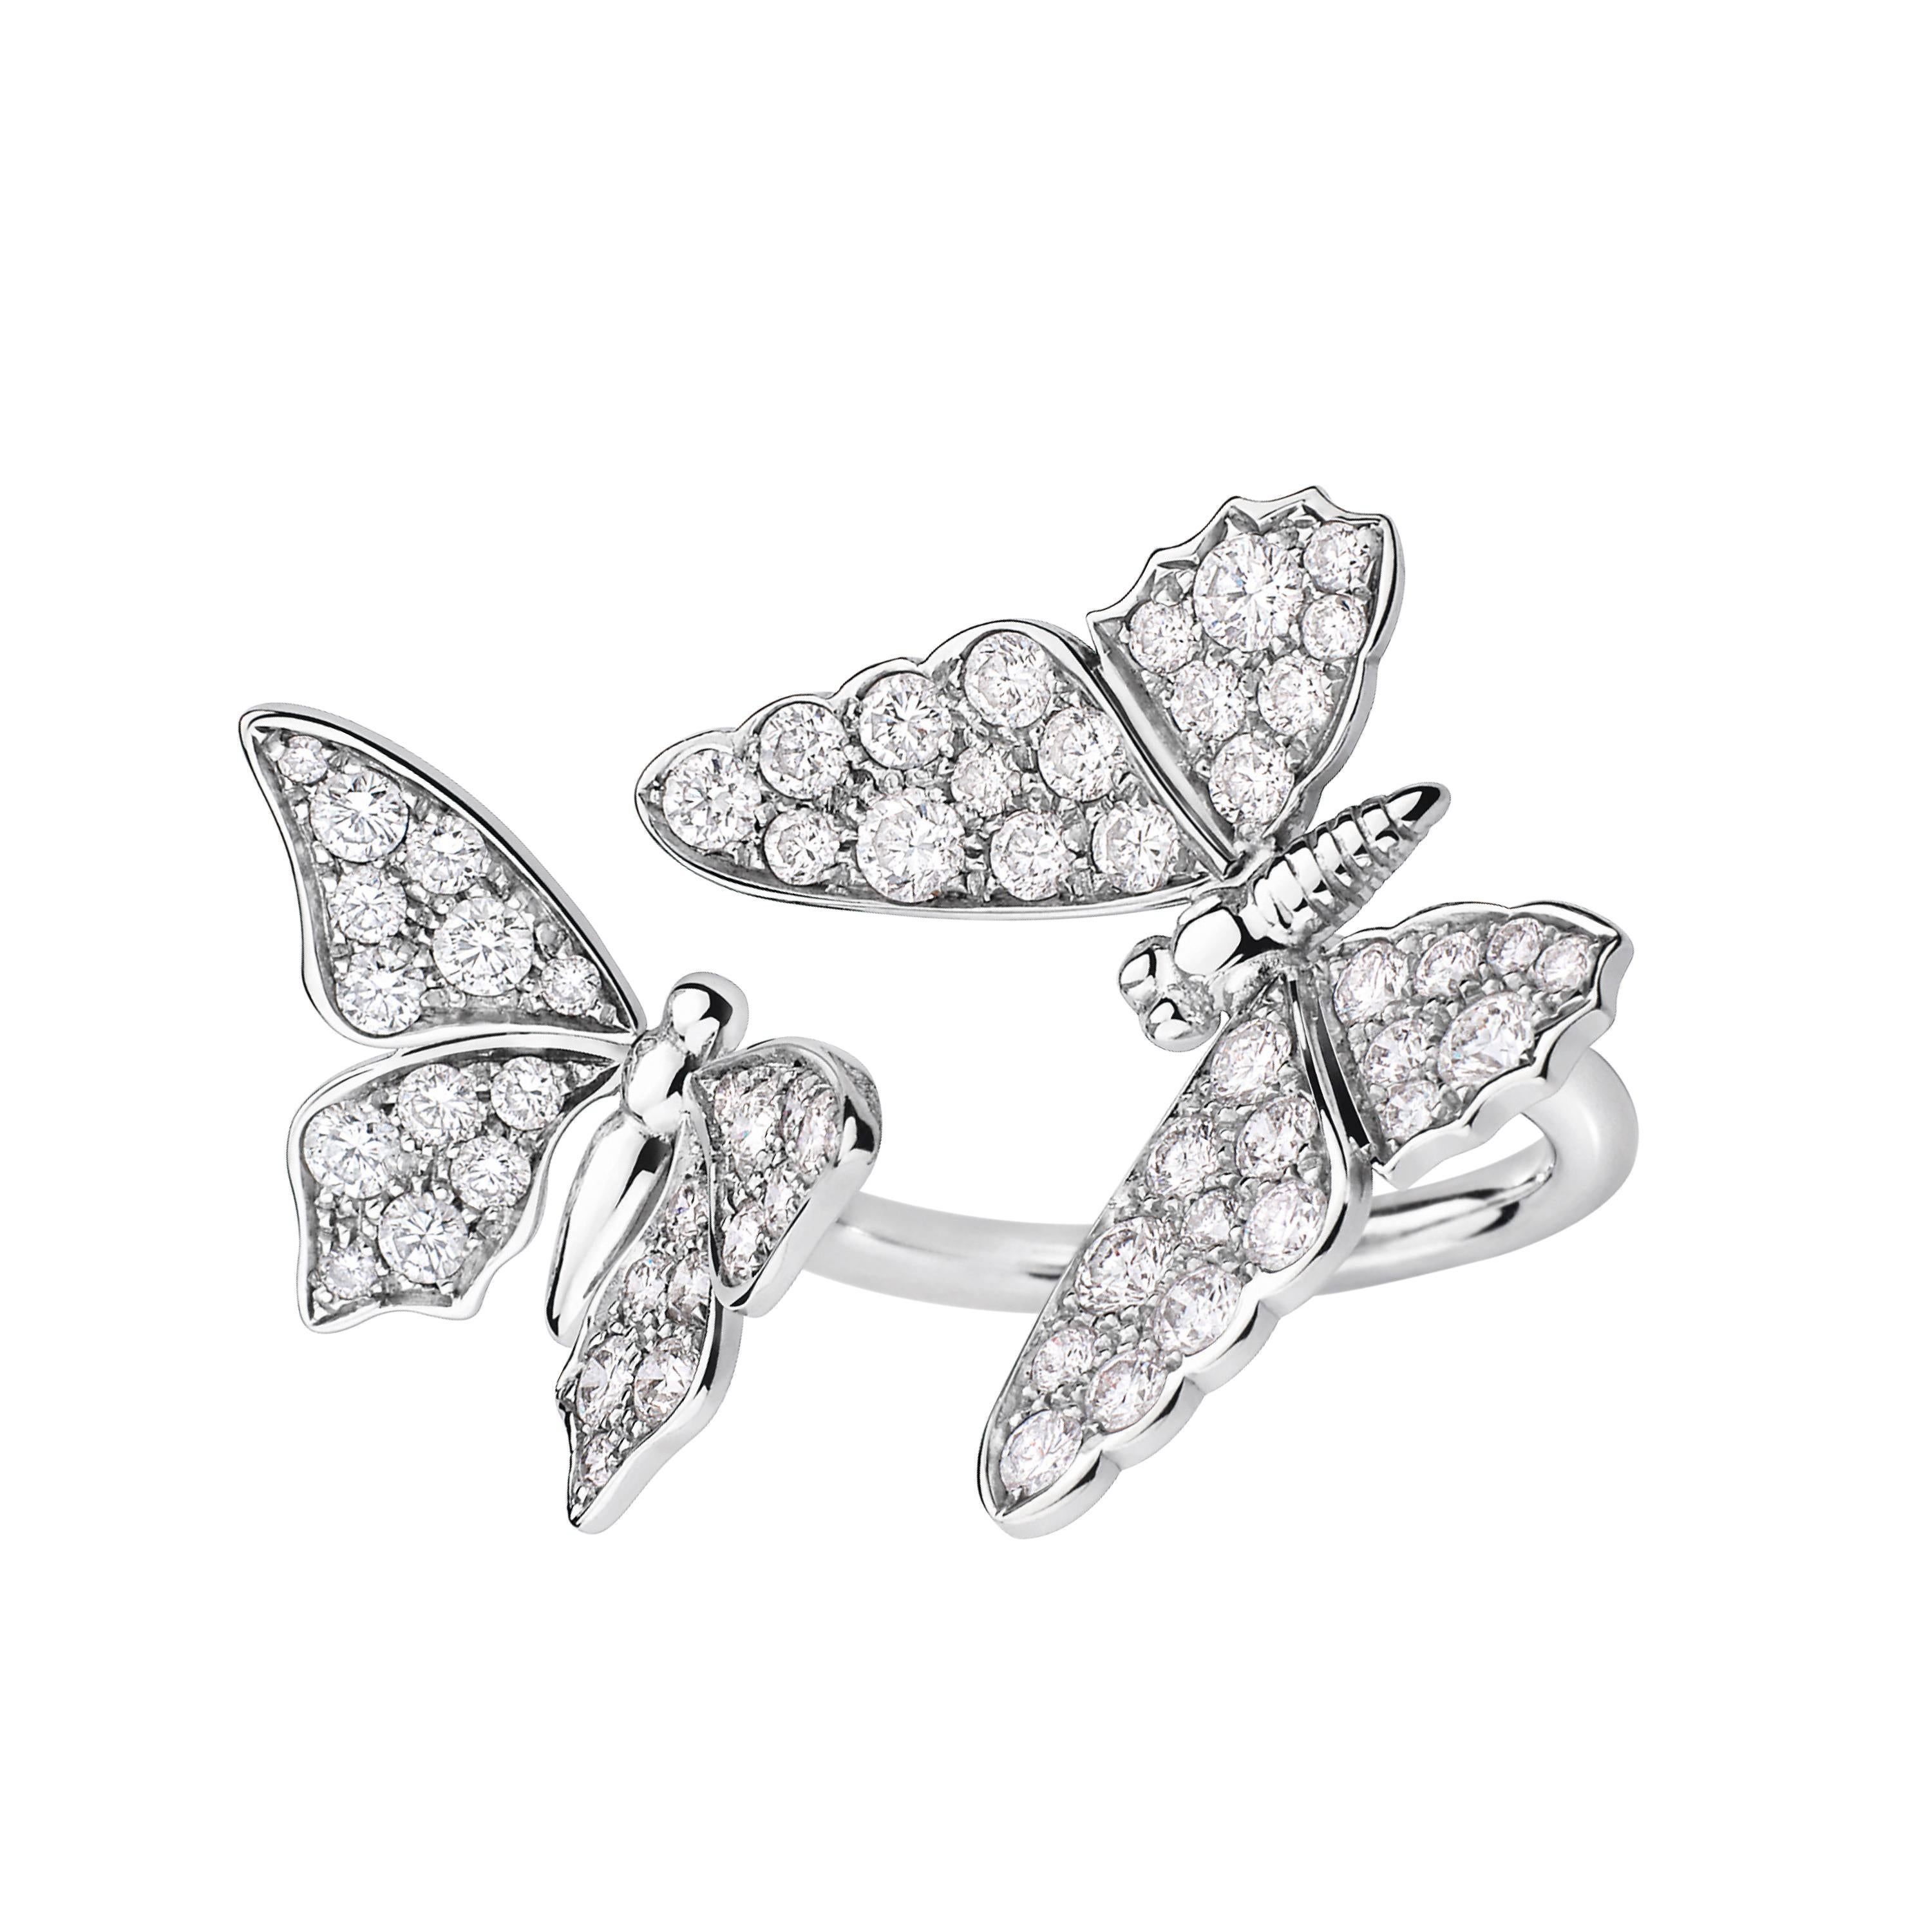 Handcrafted in France in our High Jewelry Paris workshop. Designed by Édéenne, artist and founder of Maison Édéenne, this two Butterfly ring is  in 18K white gold and set with brilliant-cut white diamonds (F/G color, VVS clarity) totaling 1.46